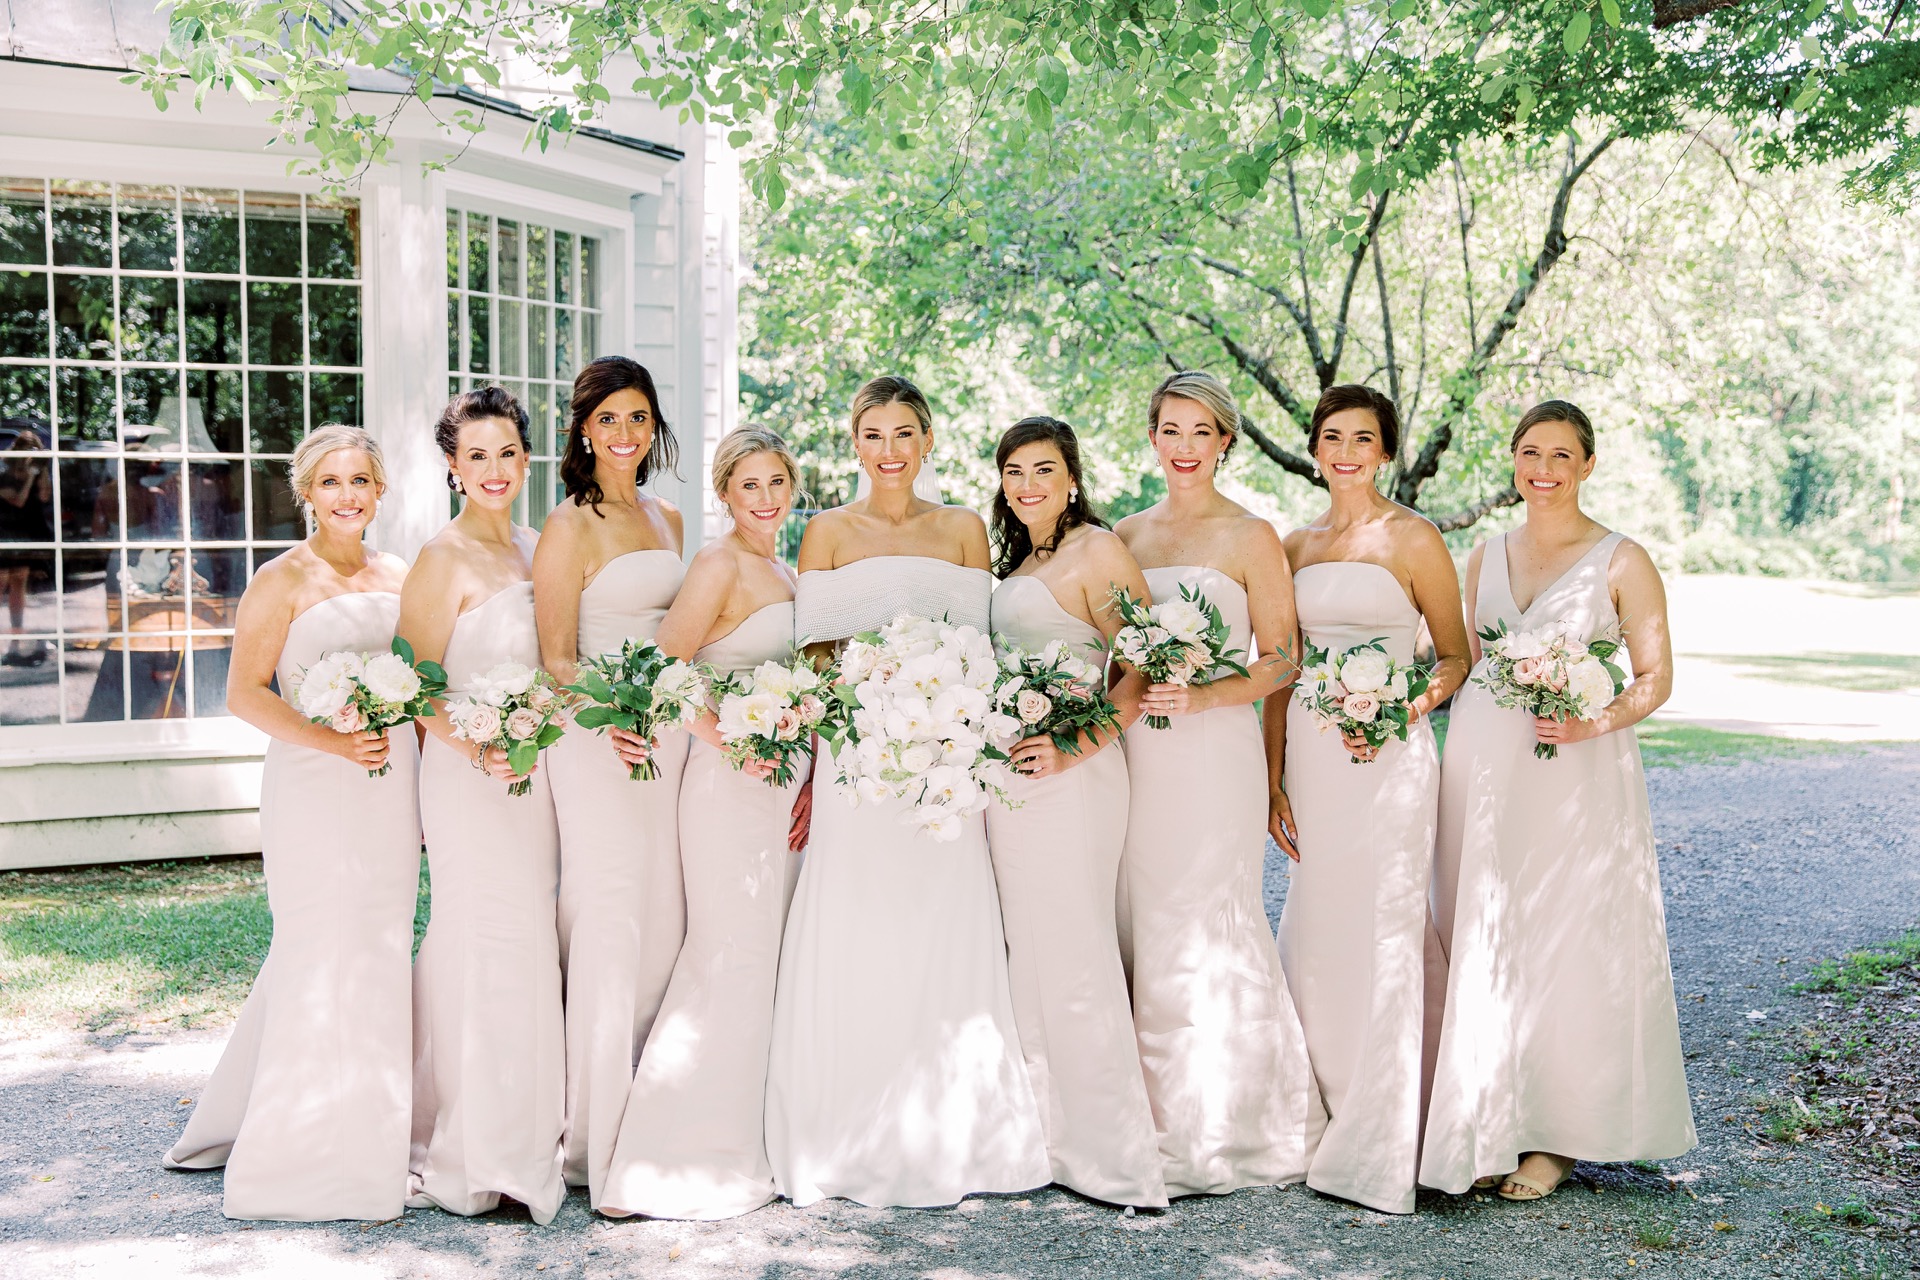 Bride in white and bridesmaids in off-white dresses posing for a portrait in front of the wedding venue